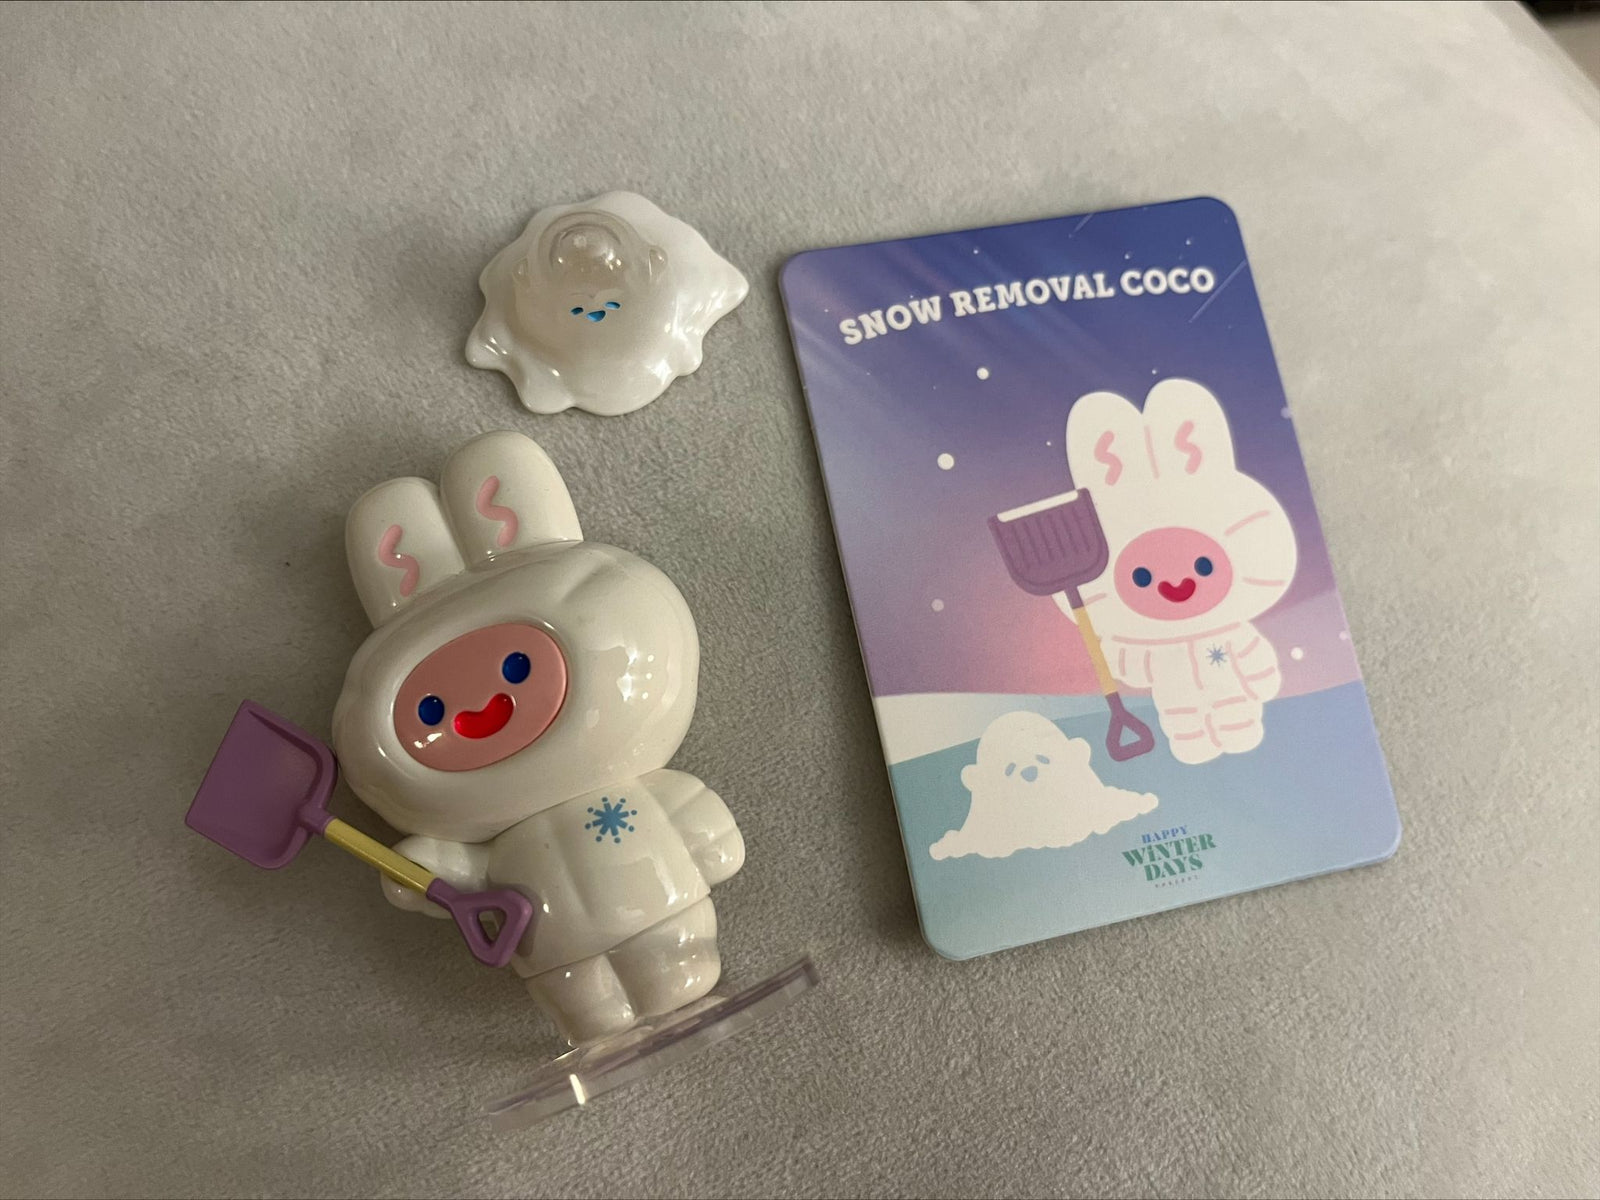 Snow Removal Coco - RiCO Happy Winter Days Blind Box Series by Rico x Finding Unicorn - 1